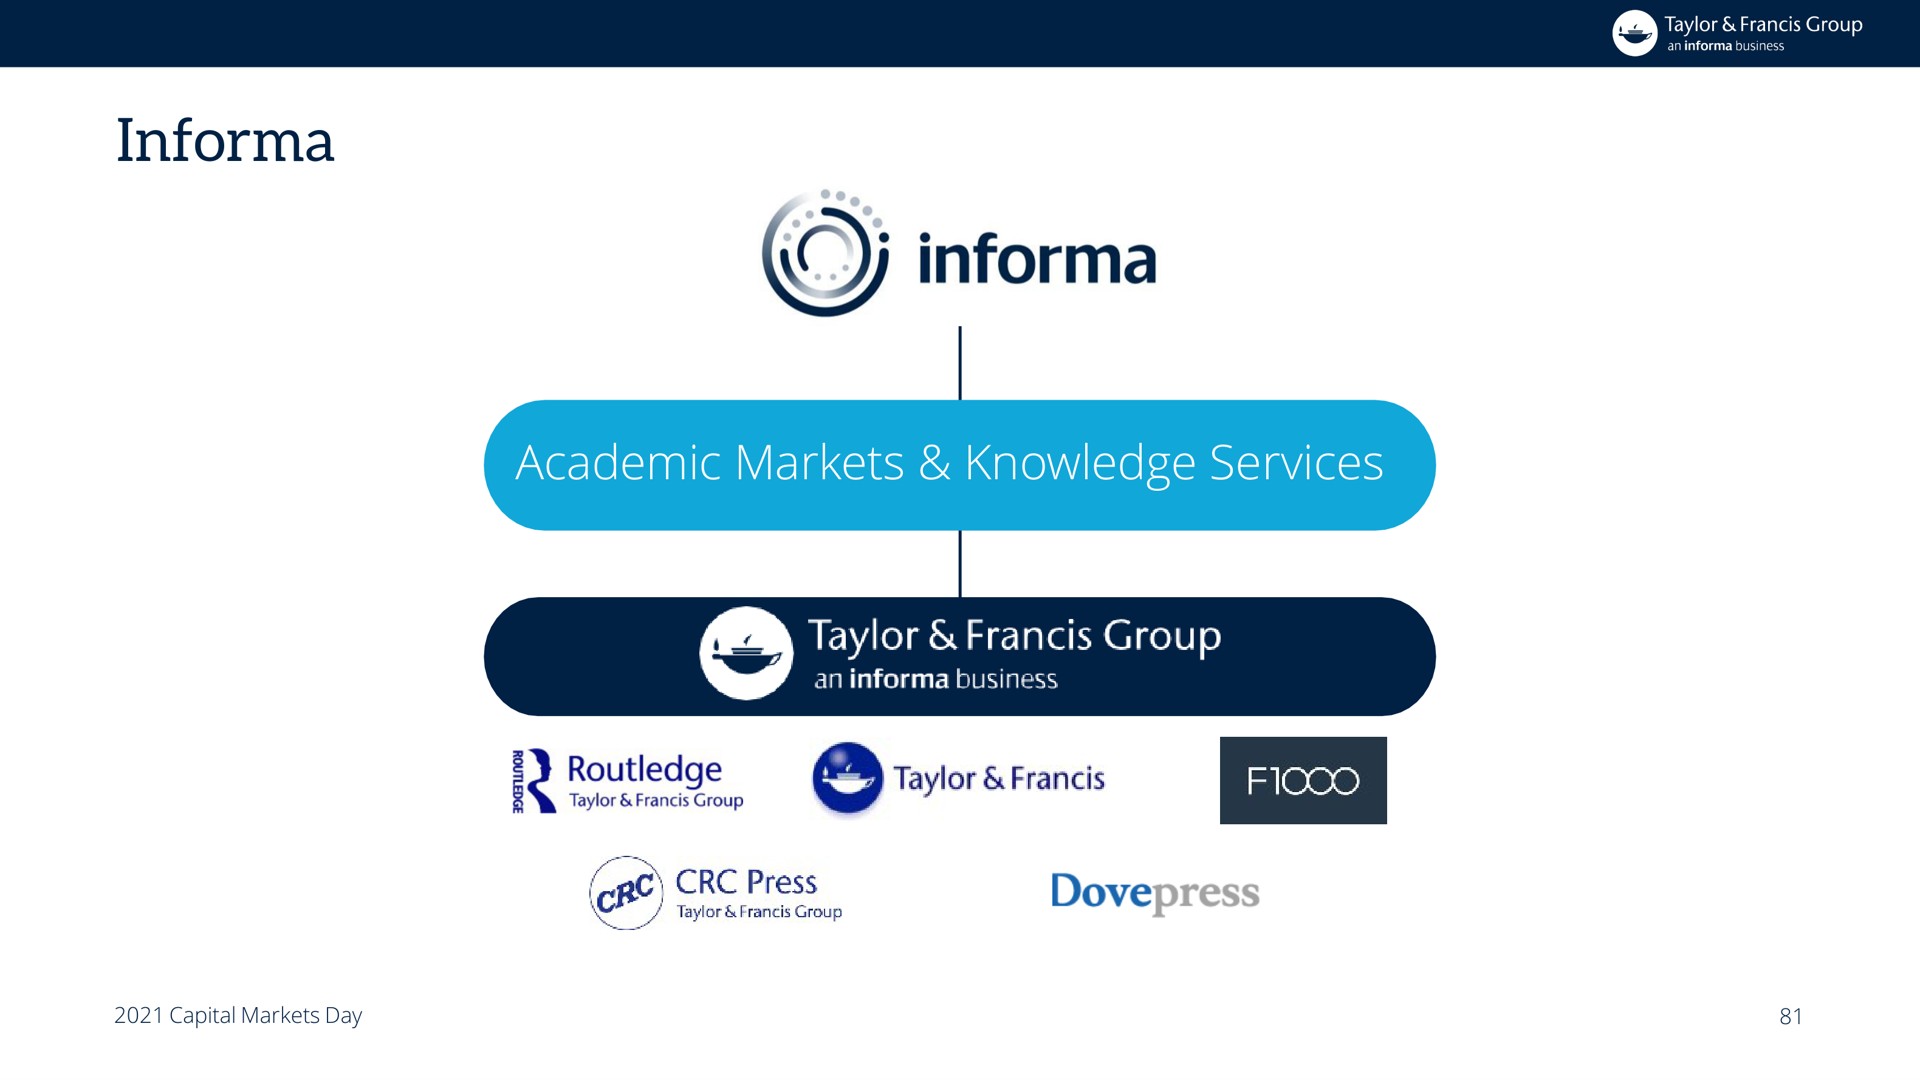 academic markets knowledge services group | Informa